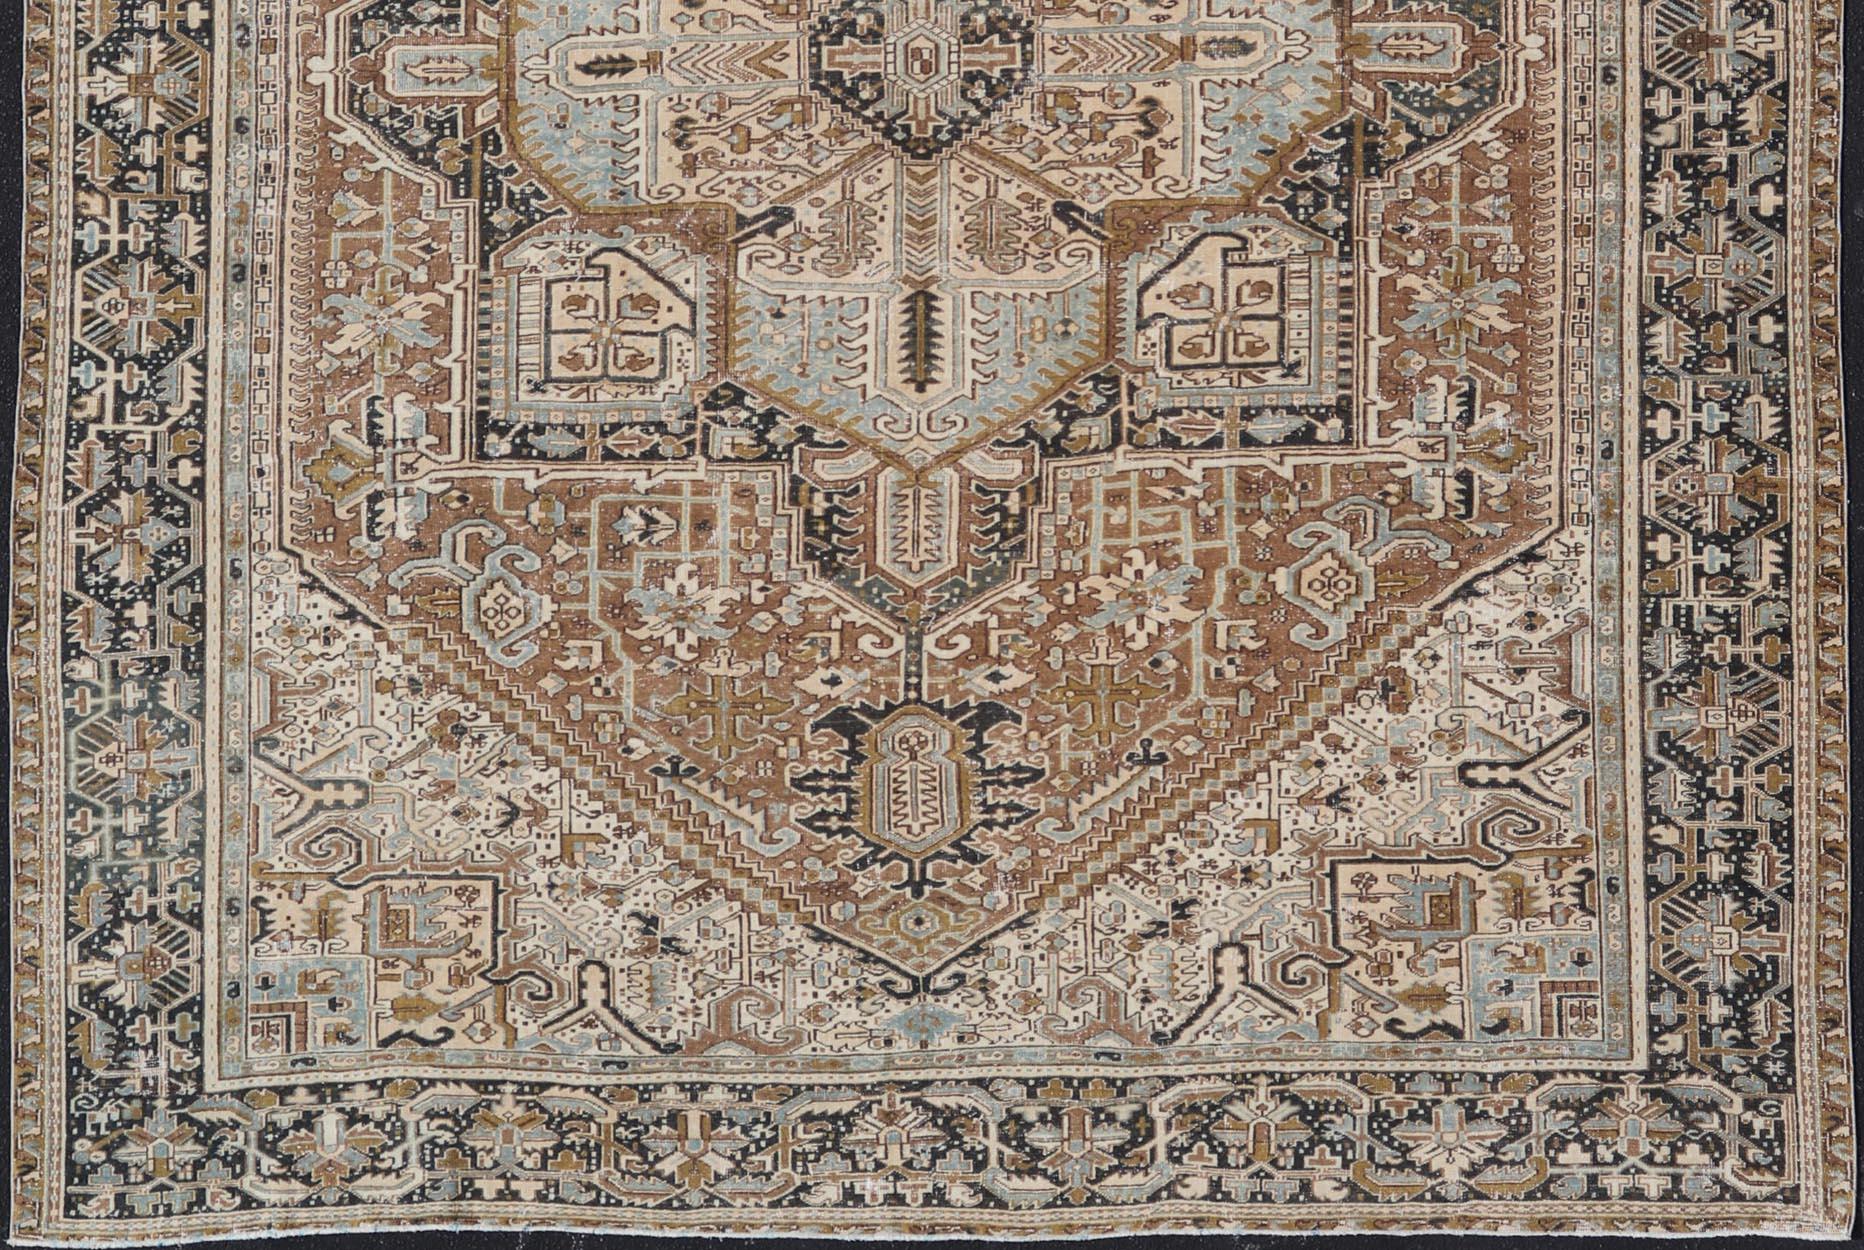 Persian Antique Heriz Rug with Geometric Design in Blue's, Tan, Cream, and Brown For Sale 4